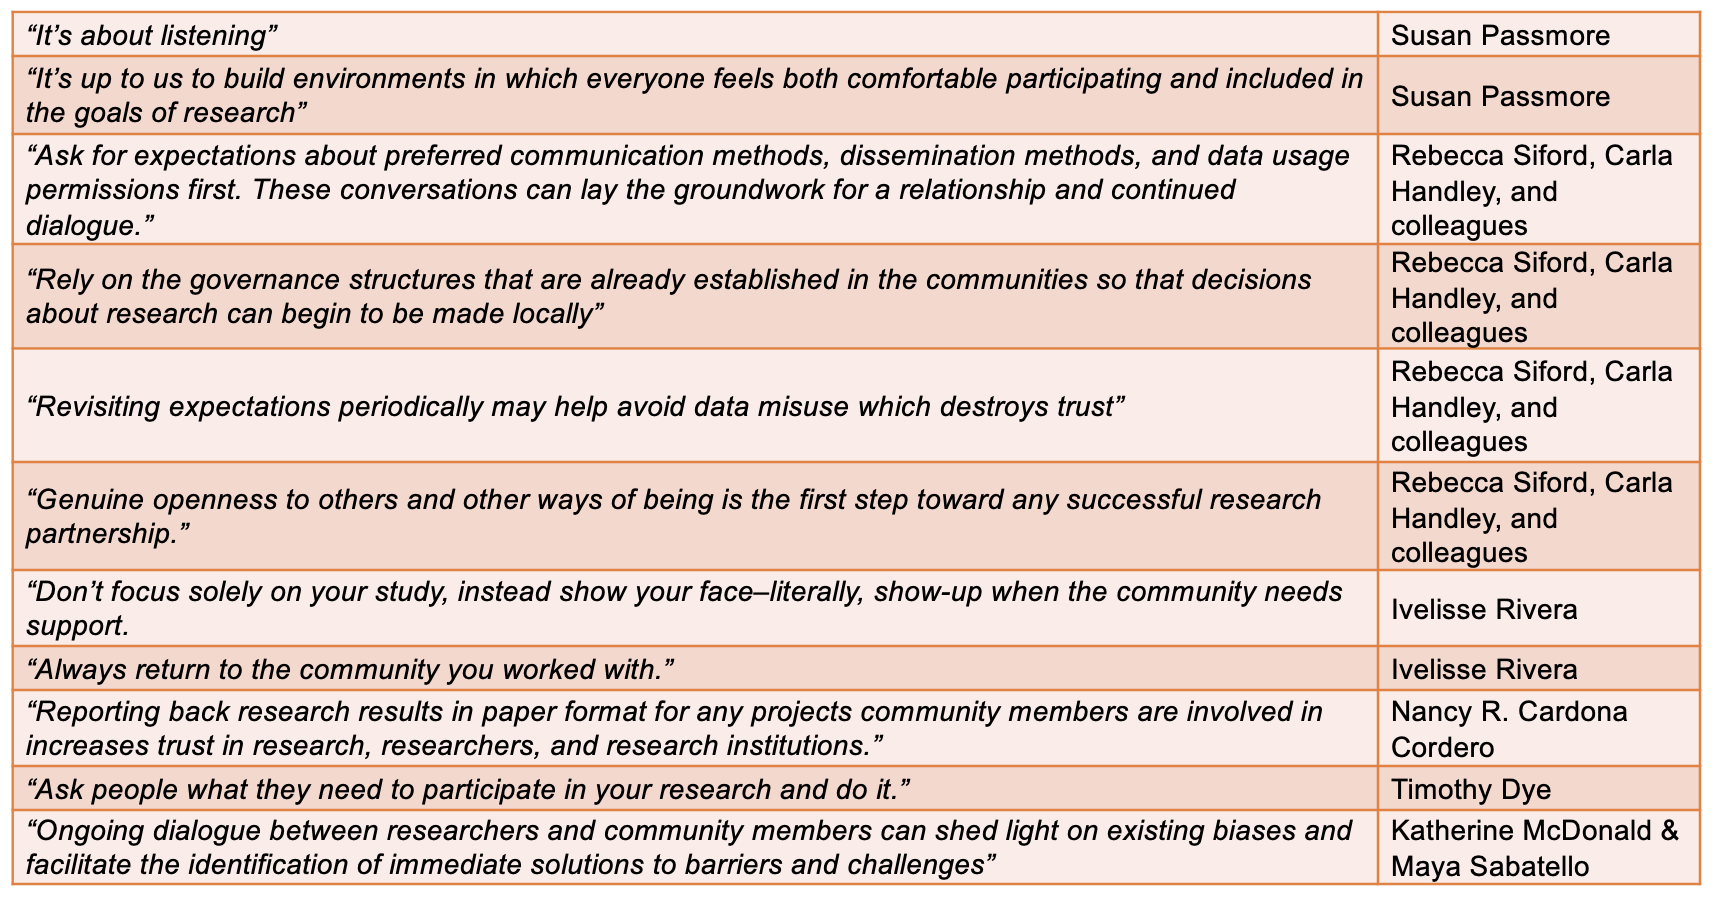 A table with quotes about recommendations for building trust, as discussed in the body text